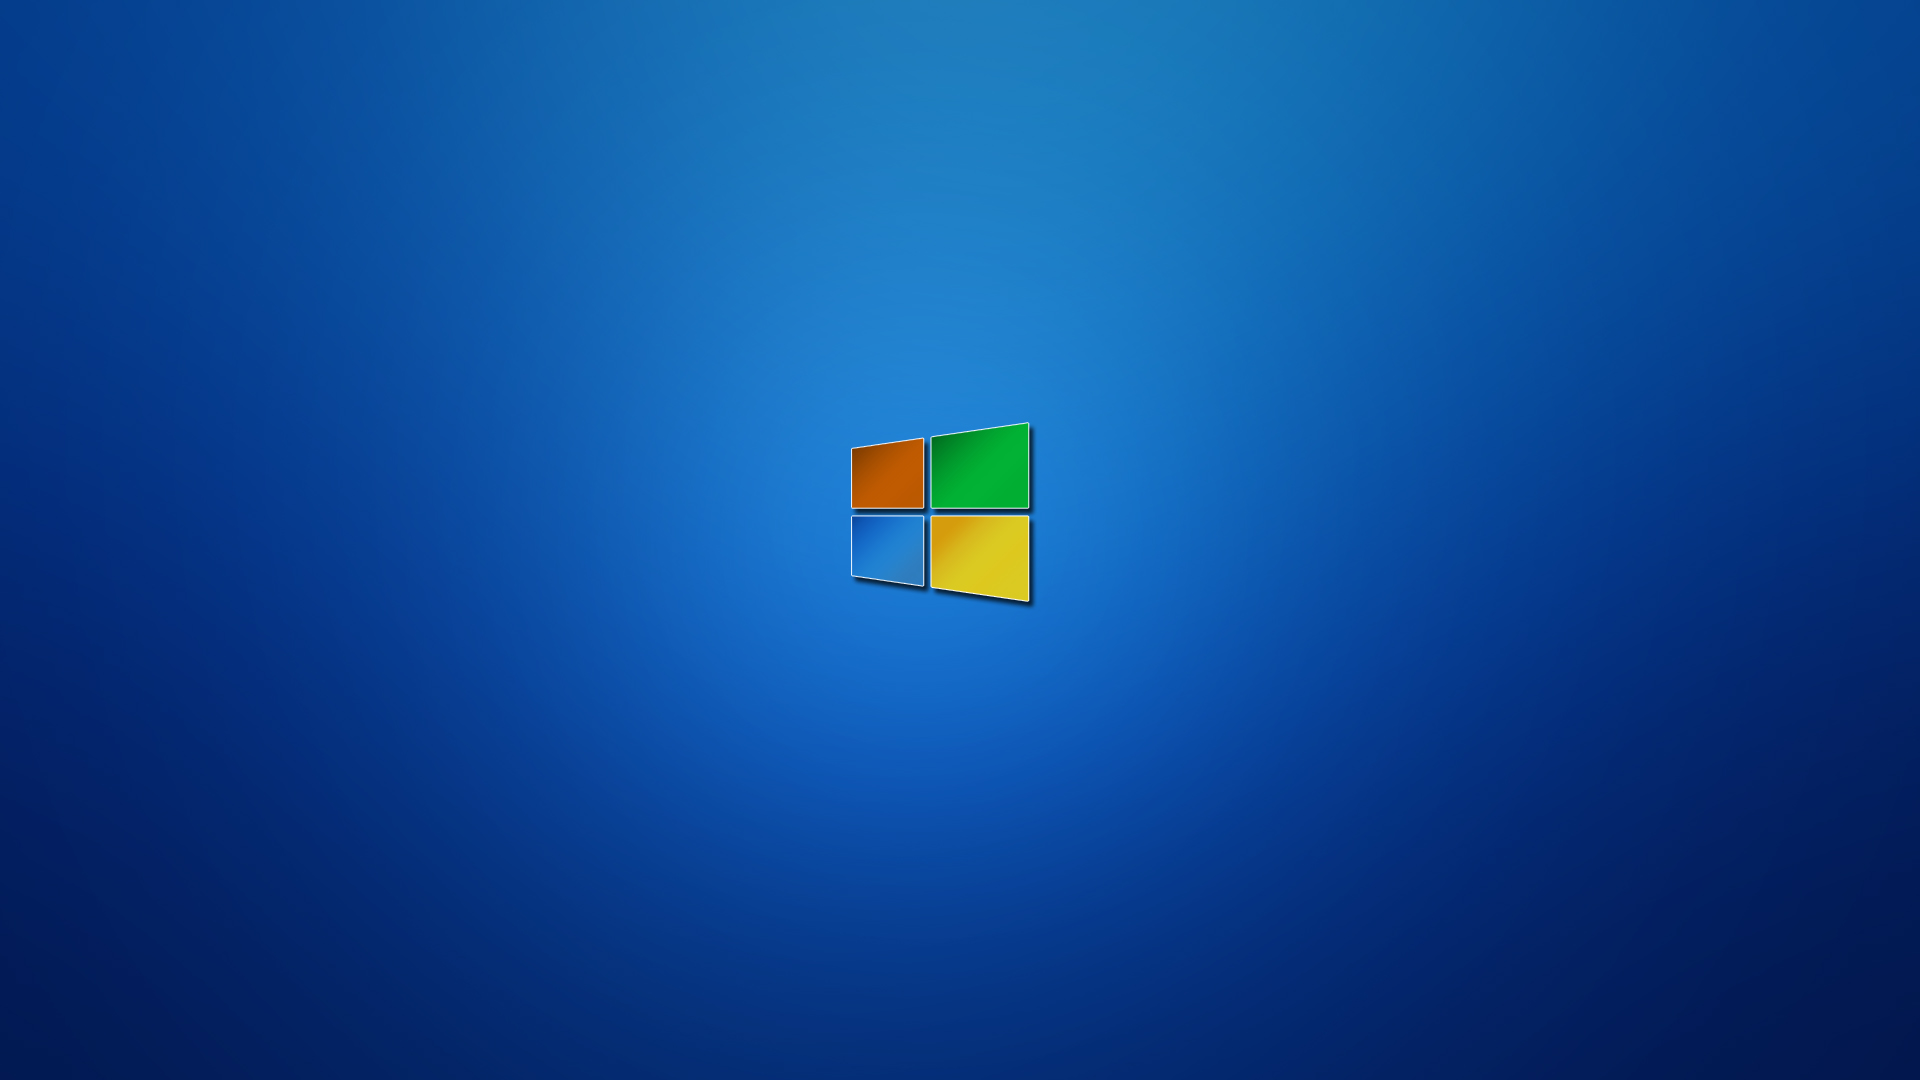 55 Windows 8 Wallpapers in HD For Download 1920x1080